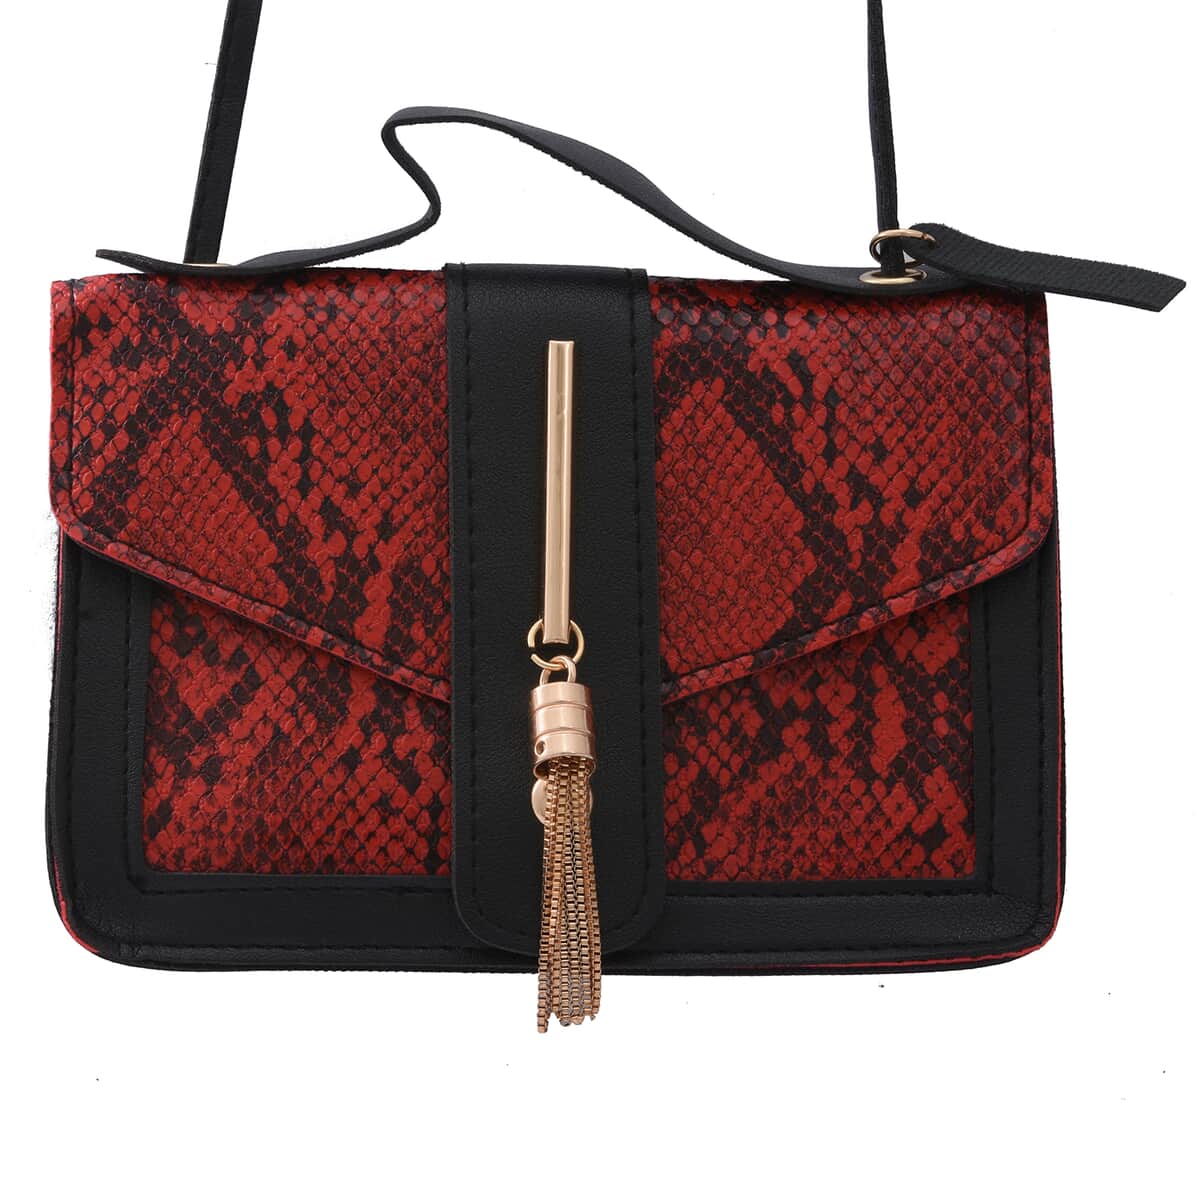 Buy Royal Siamese Red Python Embossed Faux Leather Mini Handbag with Handle  Drop and Shoulder Strap at ShopLC.